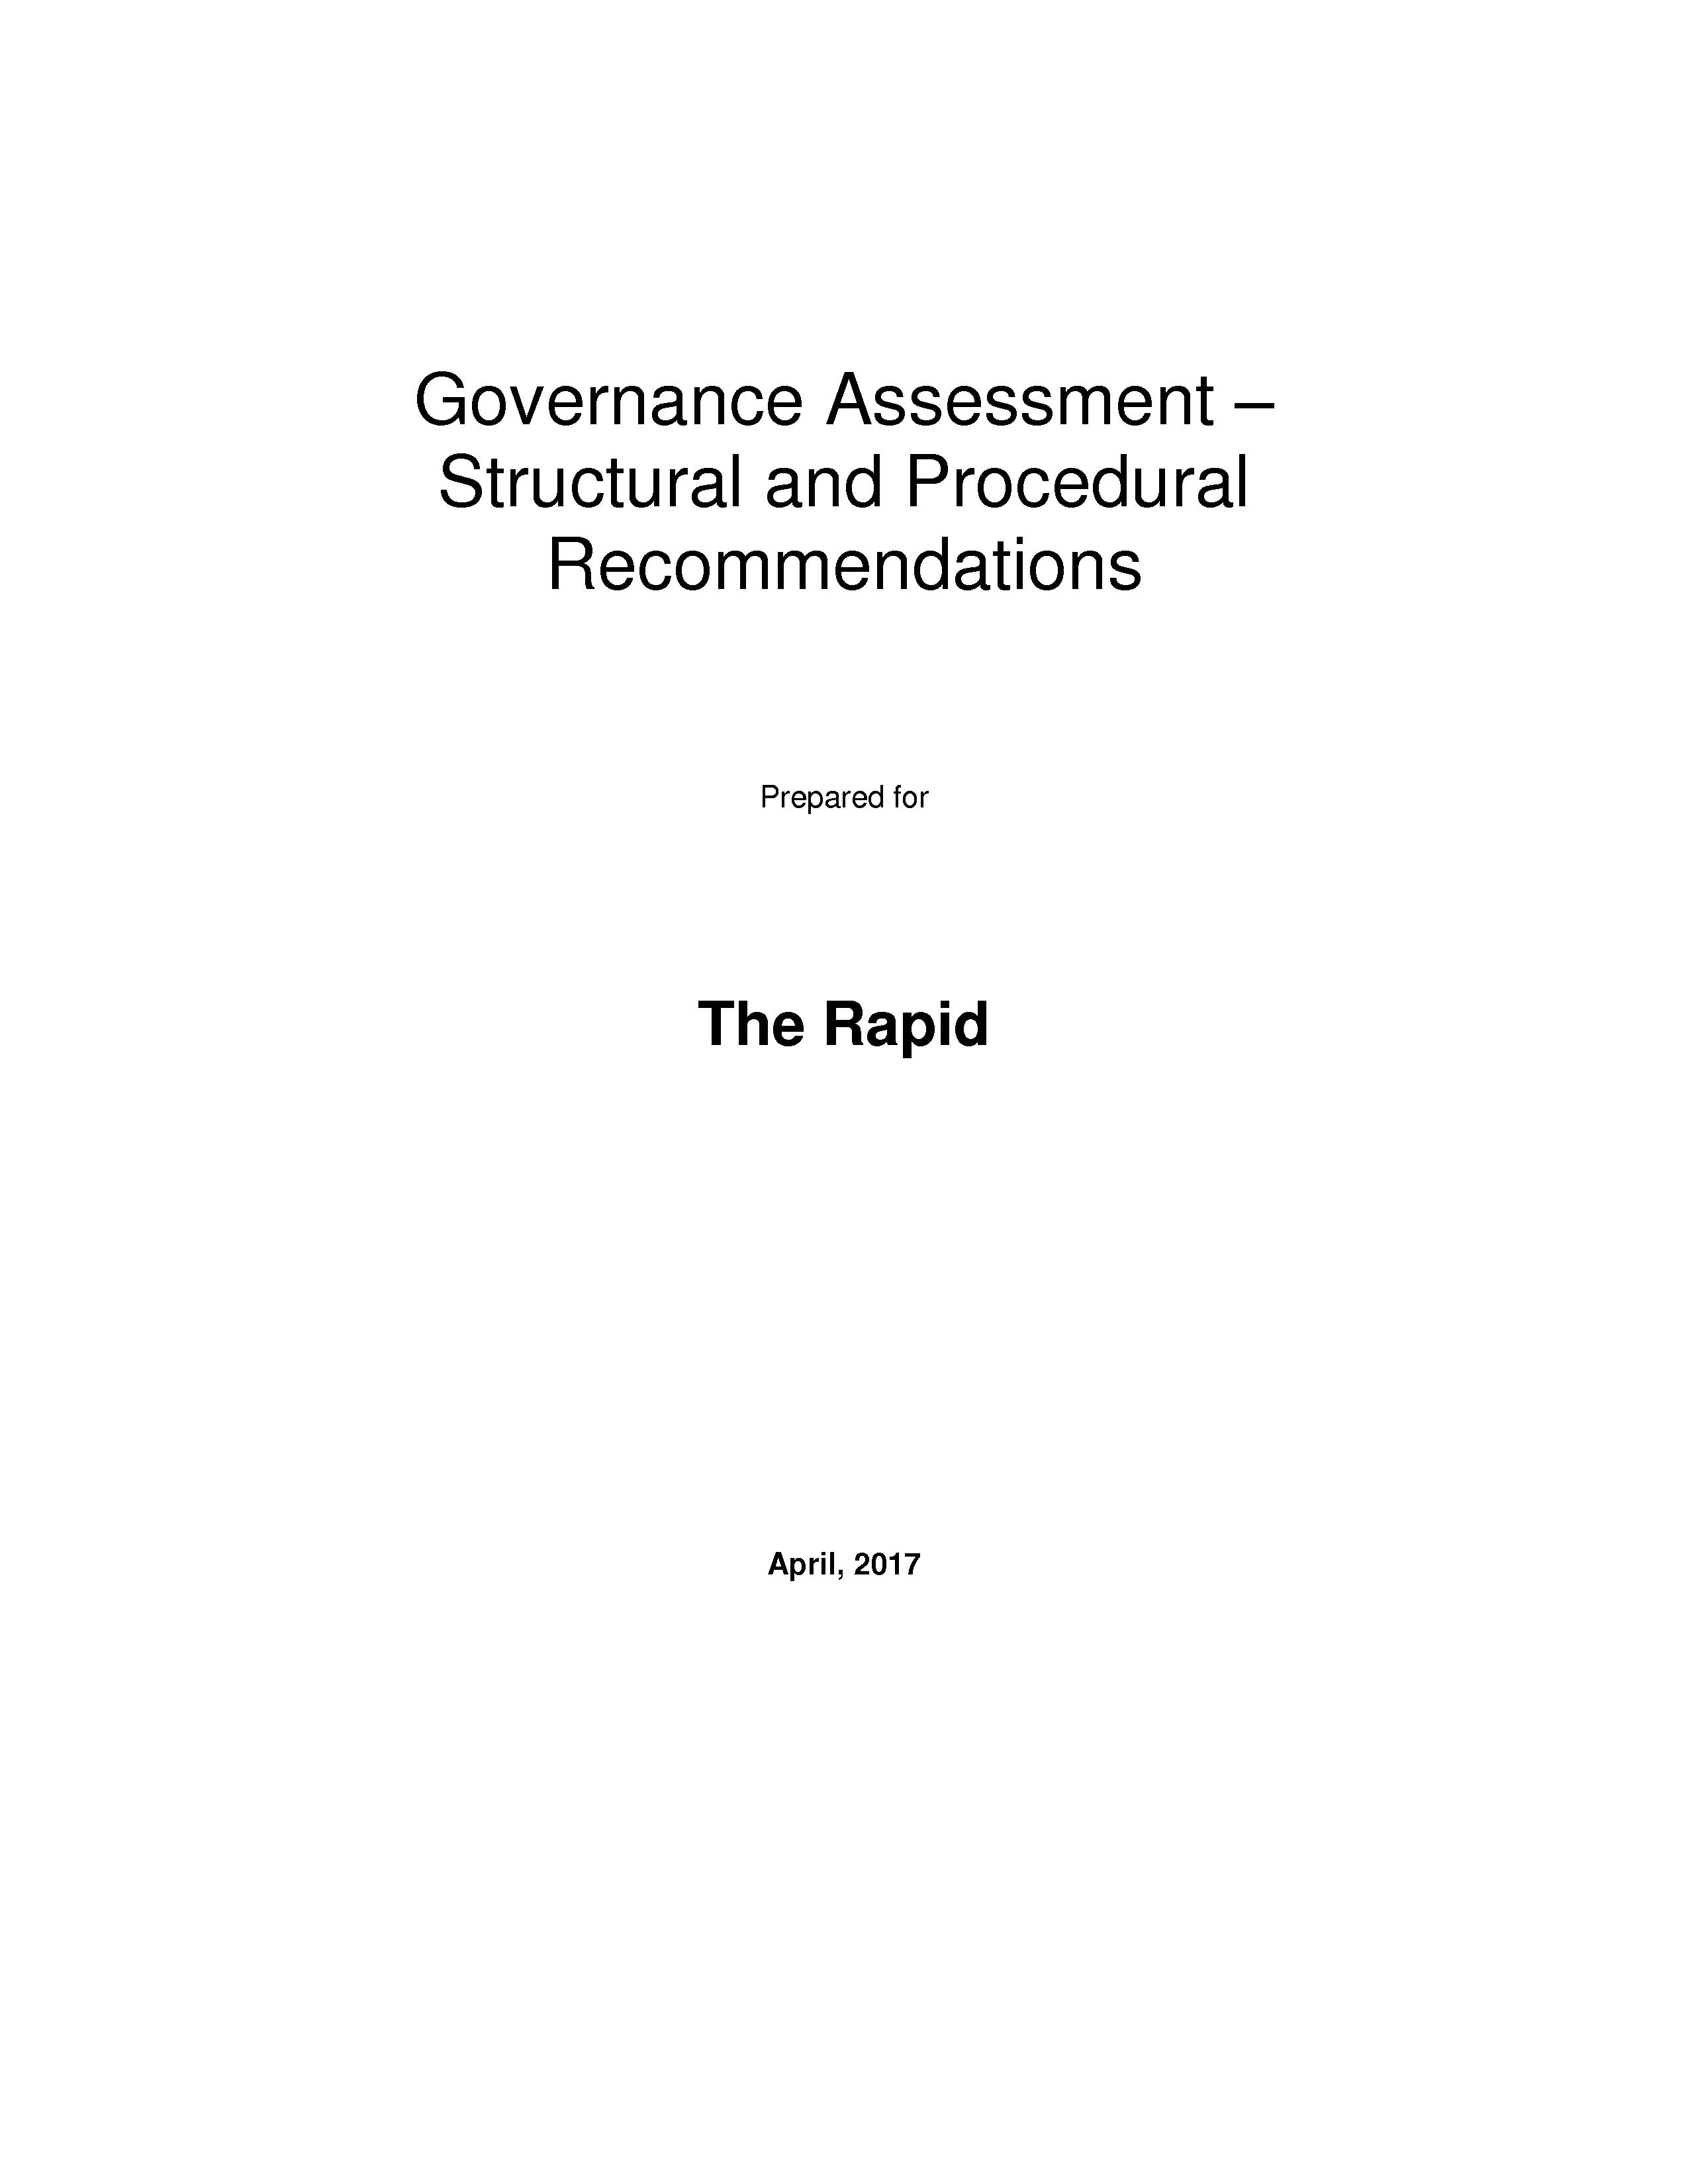 z - Cover Image: Governance Assessment -- Structural and Procedural Recommendations